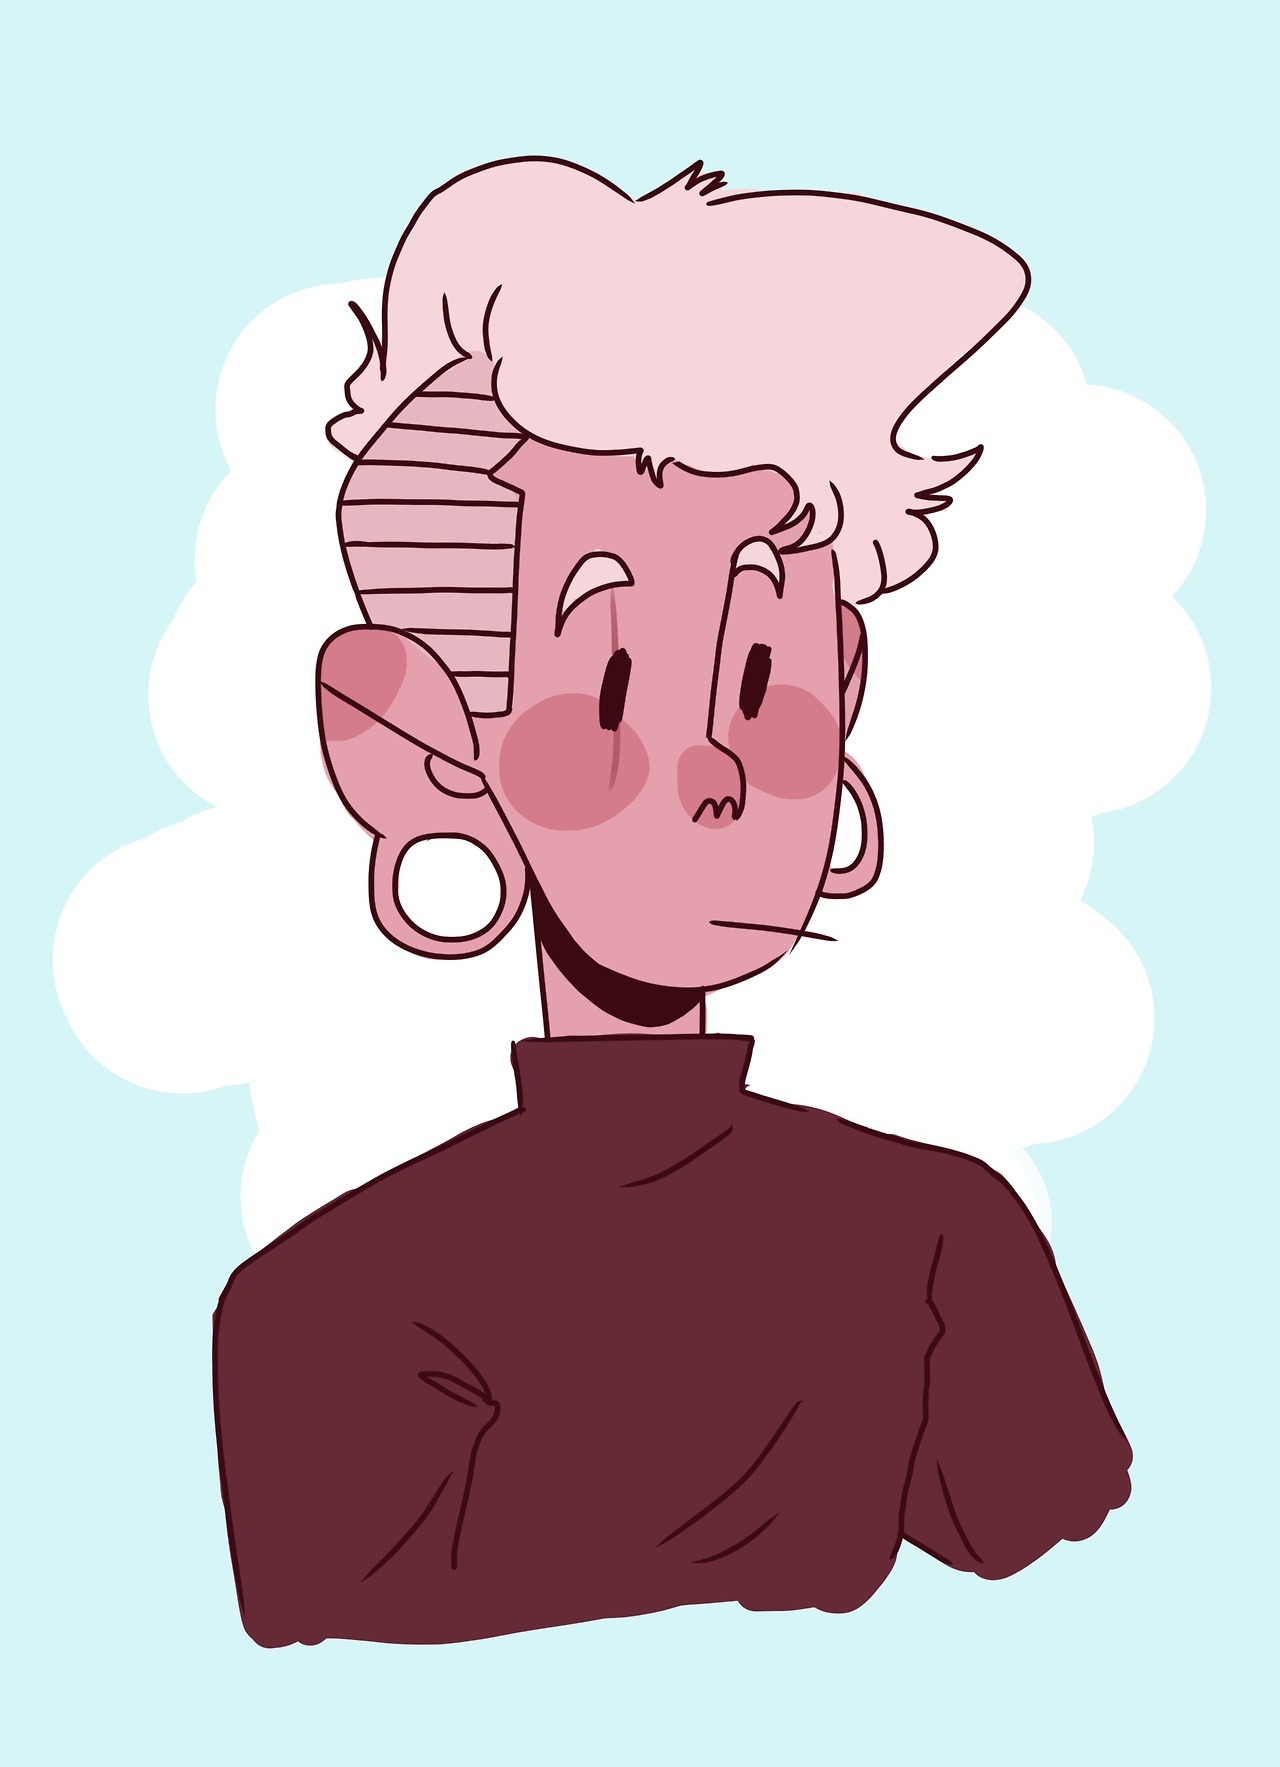 Lars is the only character i know how to draw oops